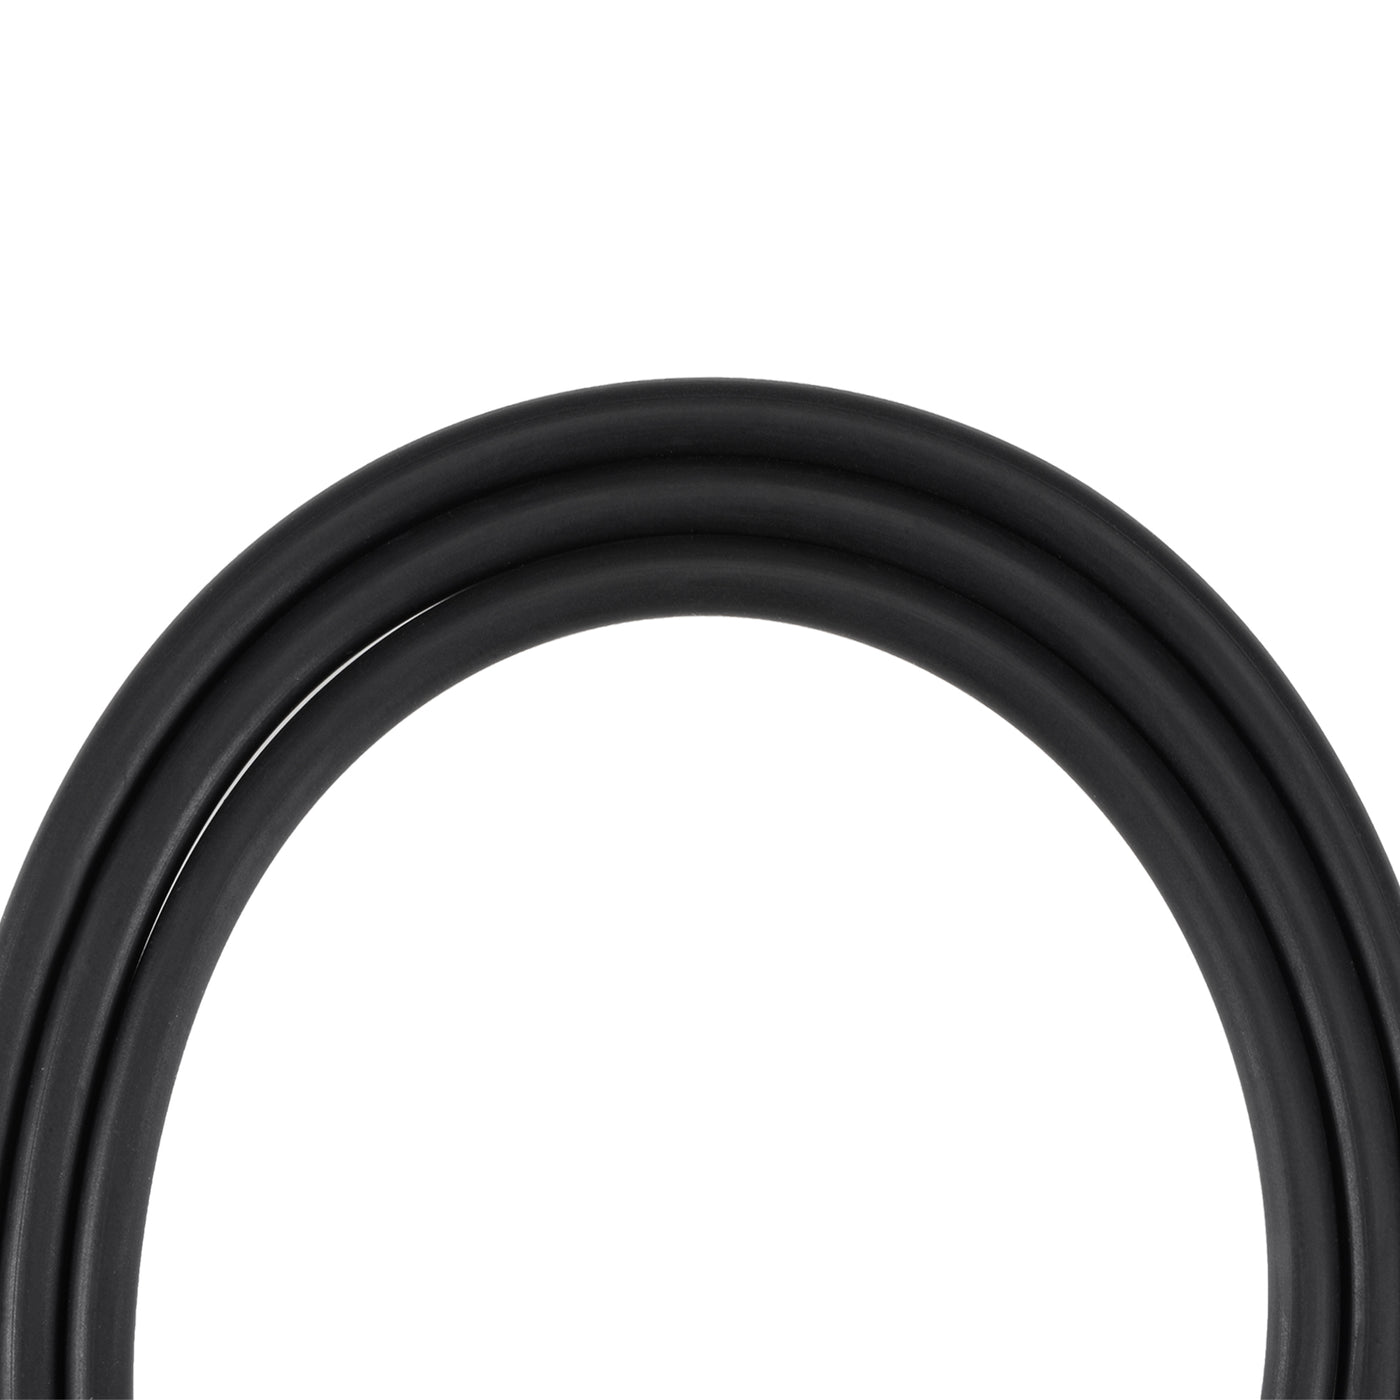 uxcell Uxcell Fuel Line Hose 4mm ID 6mm(1/4-inch) OD 16ft Oil Line & Fuel Pipe Rubber Water Hose Black